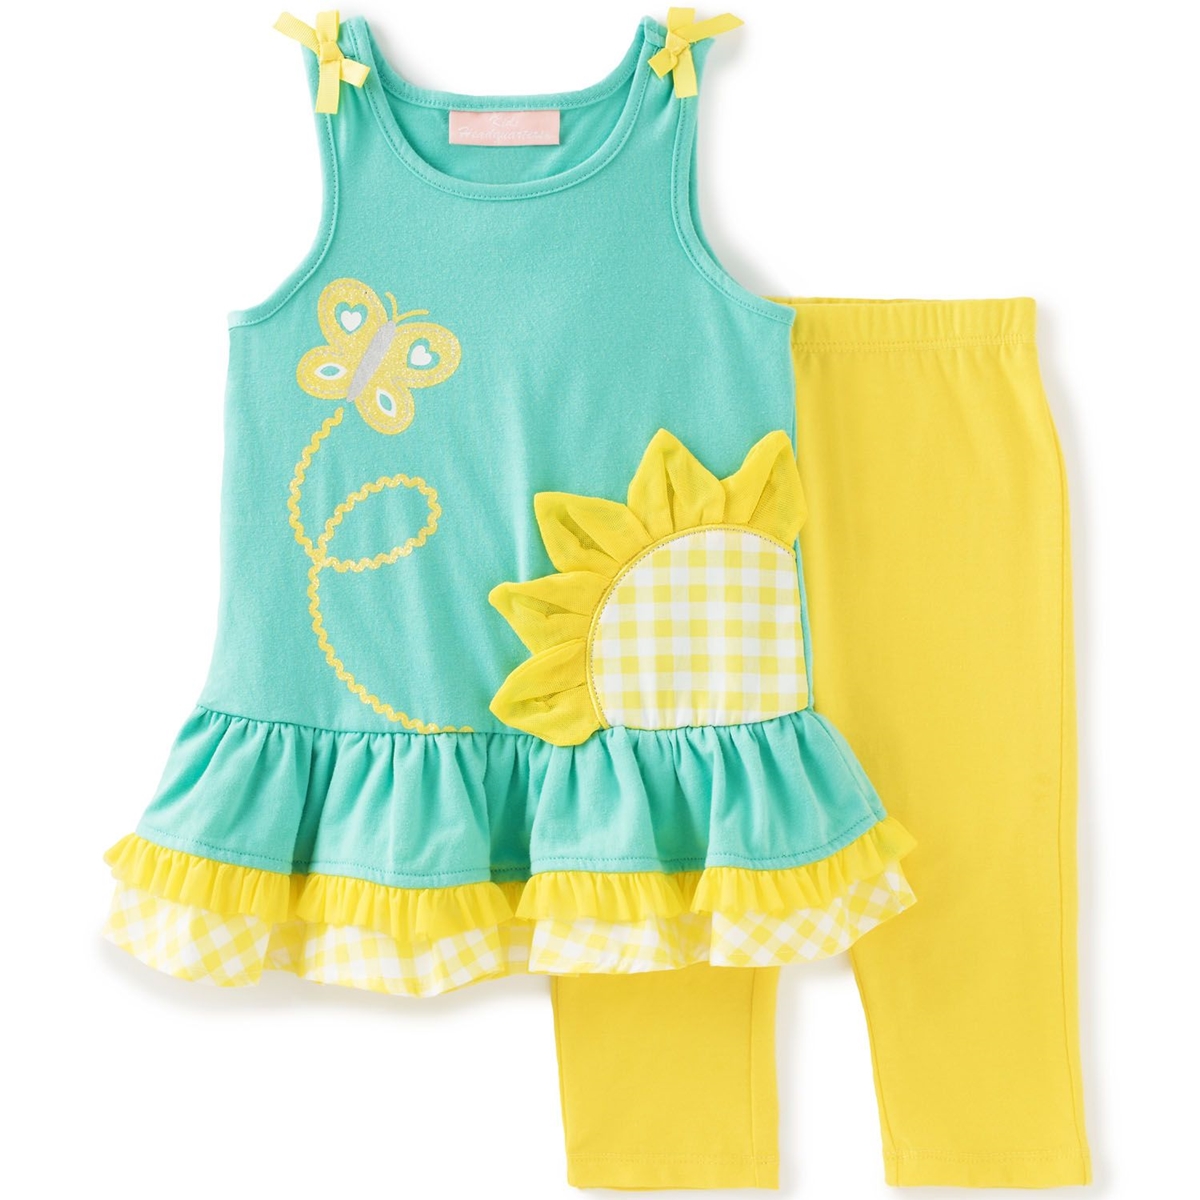 Wholesale branded baby clothes: 11 May Cheap Wholesale baby clothes: Carters , Gymboree @25 RM